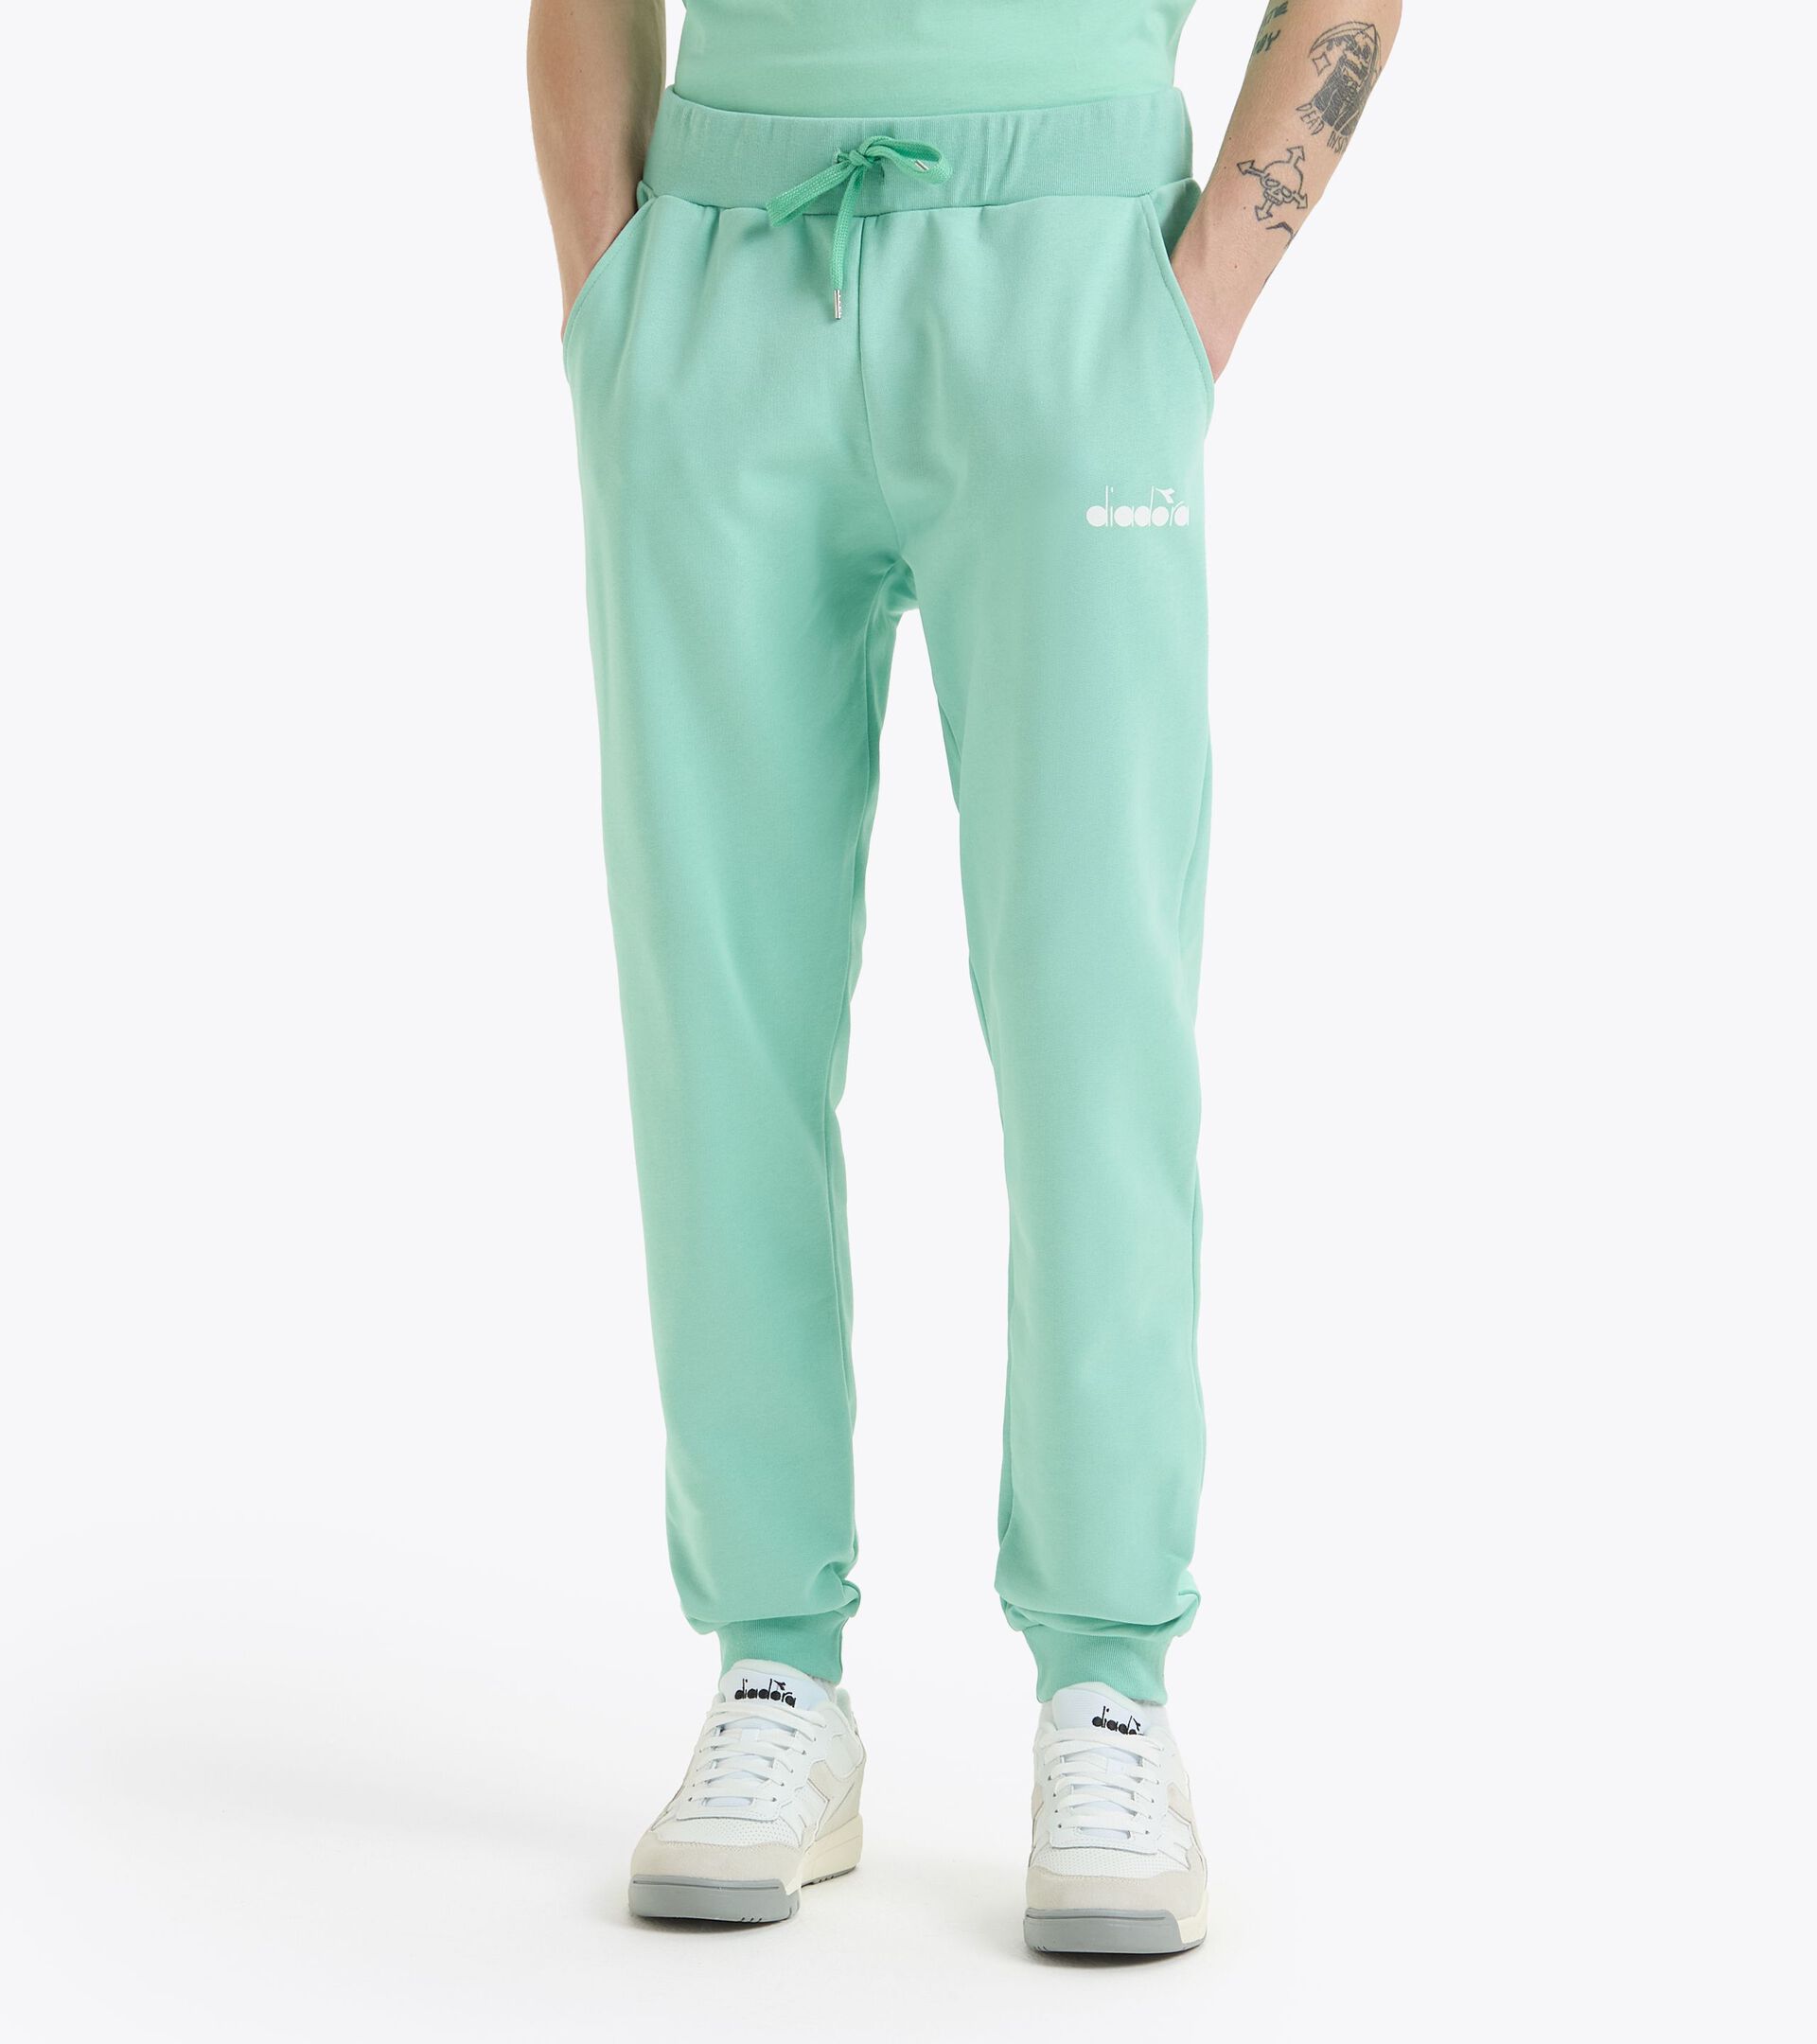 Sporty sweatpants - Made in Italy - Gender Neutral PANTS LOGO NEON GREEN - Diadora